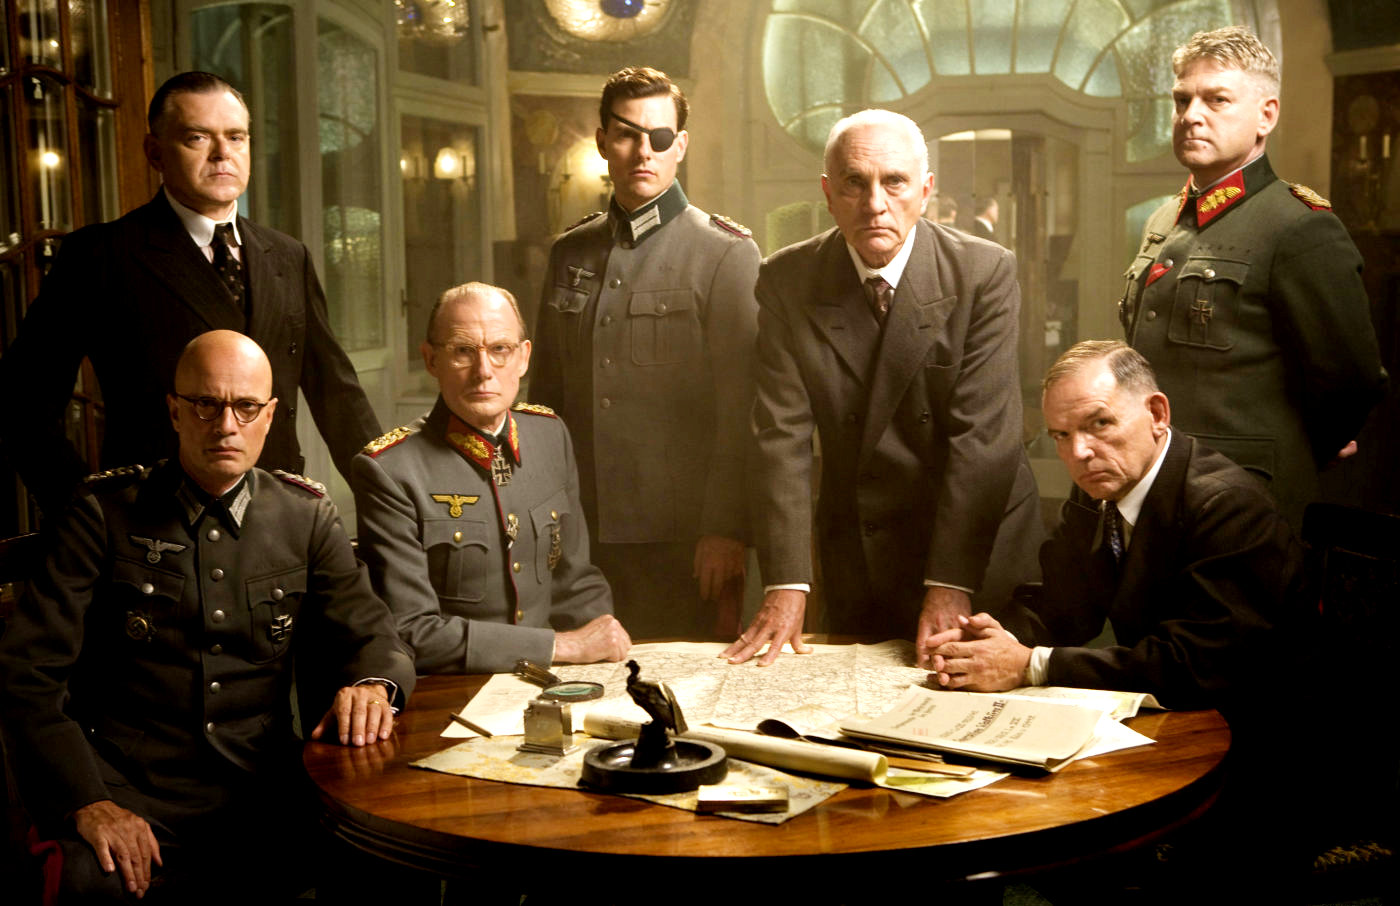 Kevin McNally,Christian Berkel,Bill Nighy,Tom Cruise,Terence Stamp,David Schofield,Kenneth Brannagh in United Artists' Valkyrie (2008)